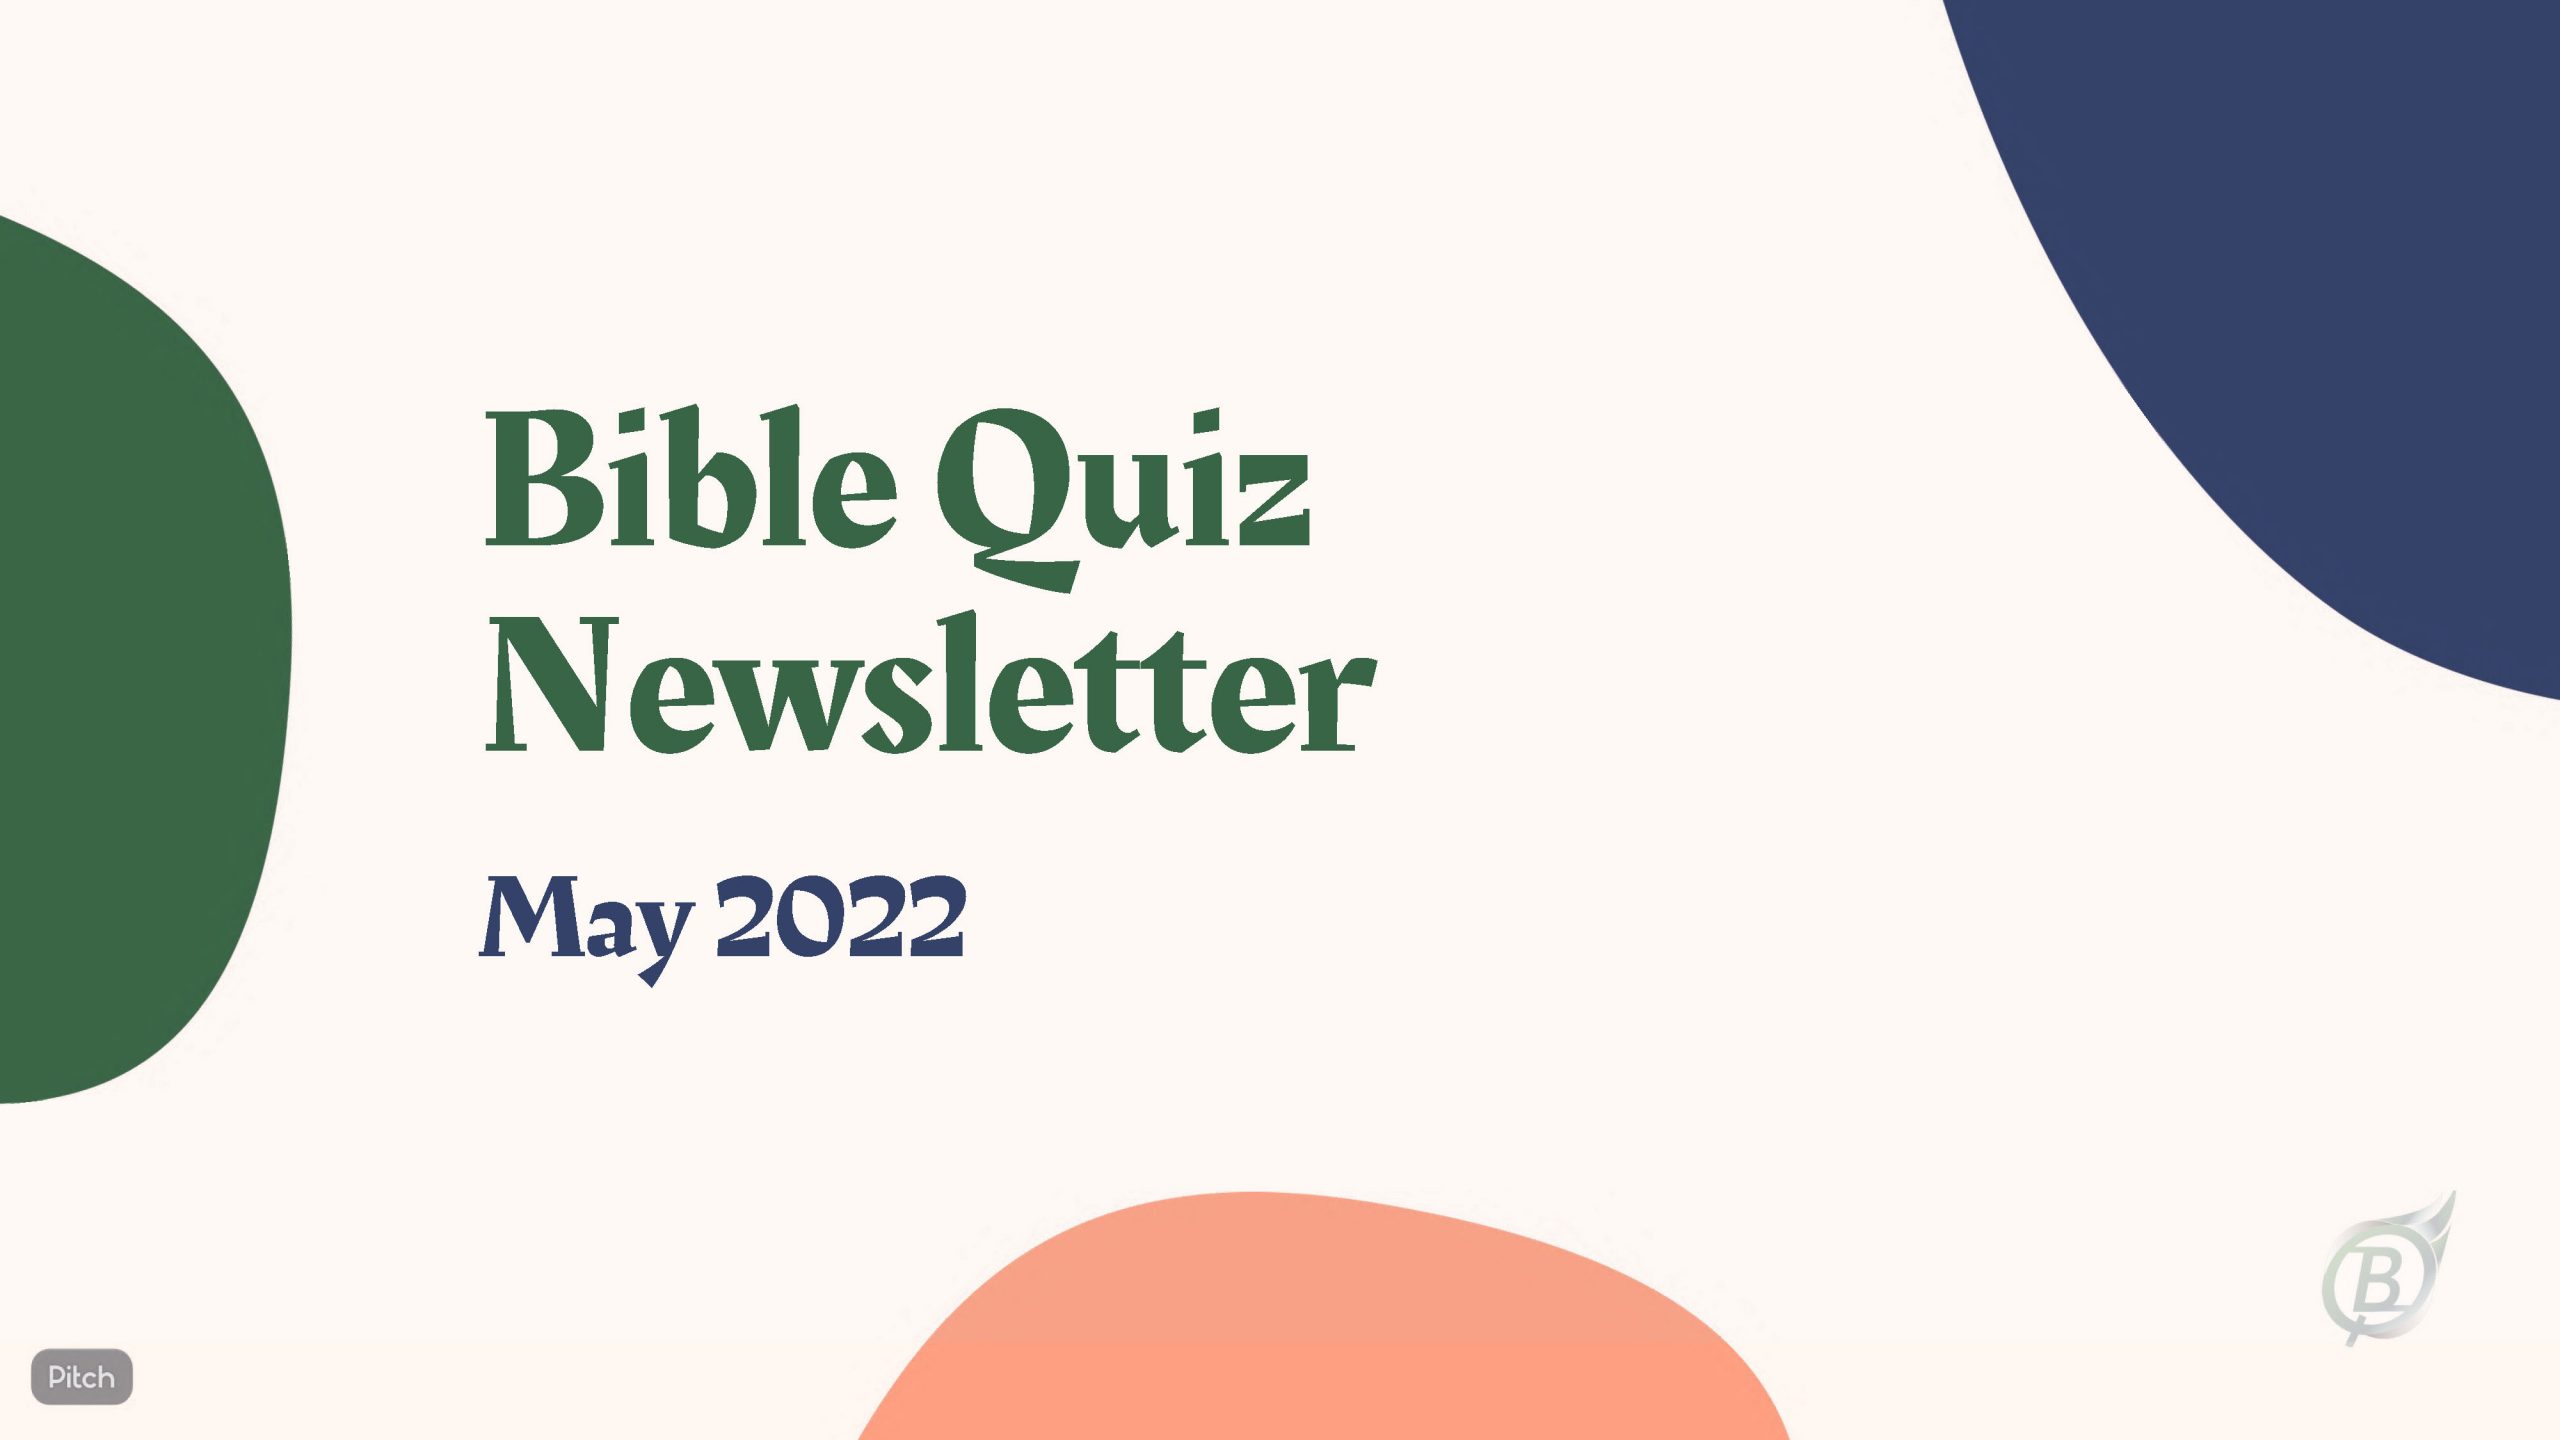 Bible Quiz Newsletter - May 2022